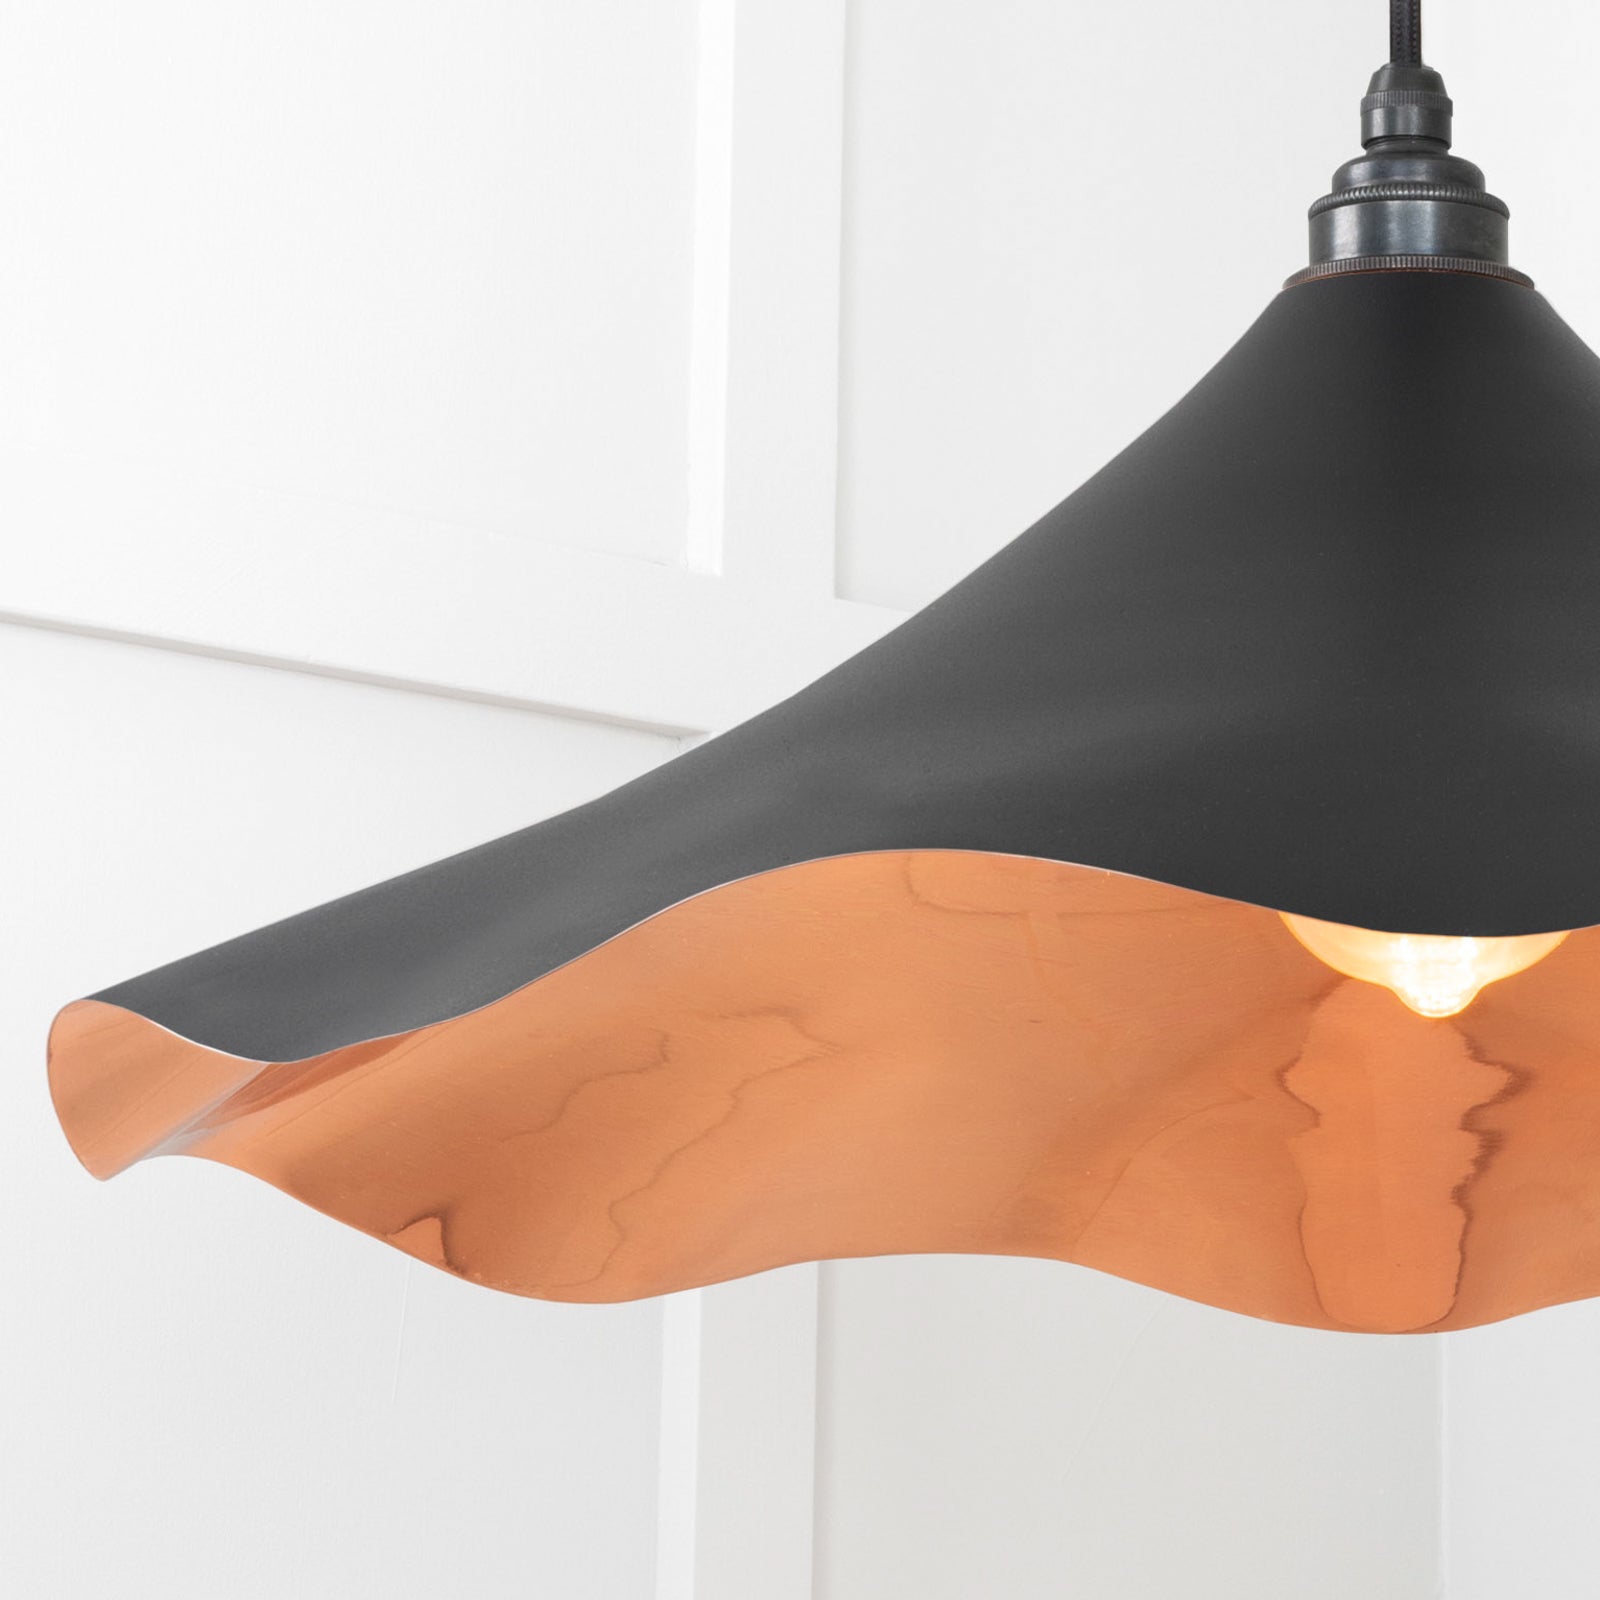 SHOW Close Up Image of Flora Ceiling Light in Elan Black in smooth Copper